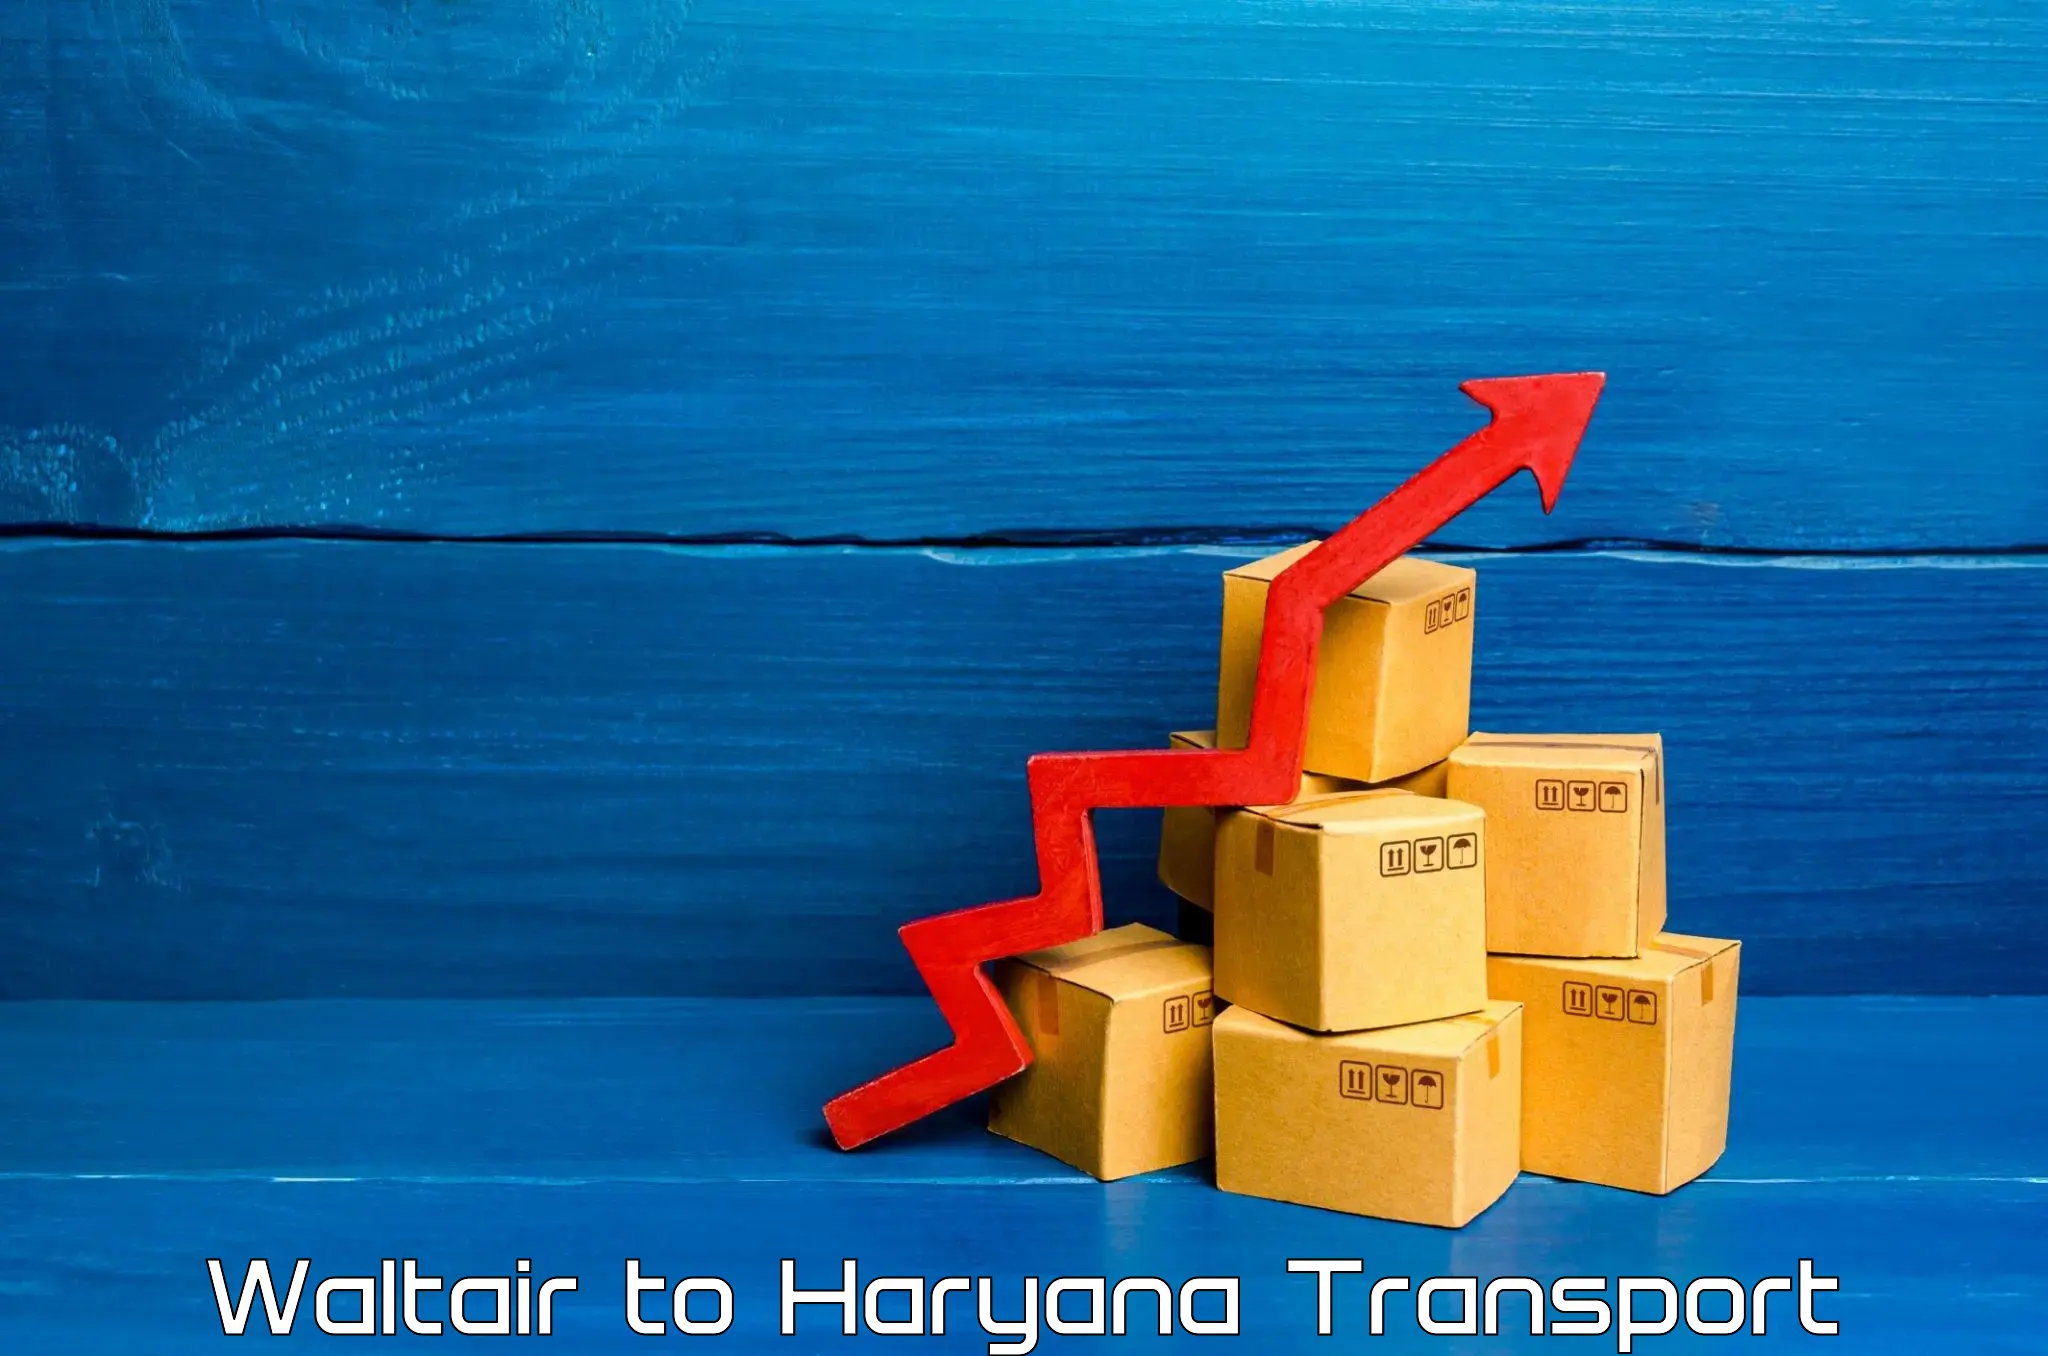 Daily parcel service transport in Waltair to Haryana